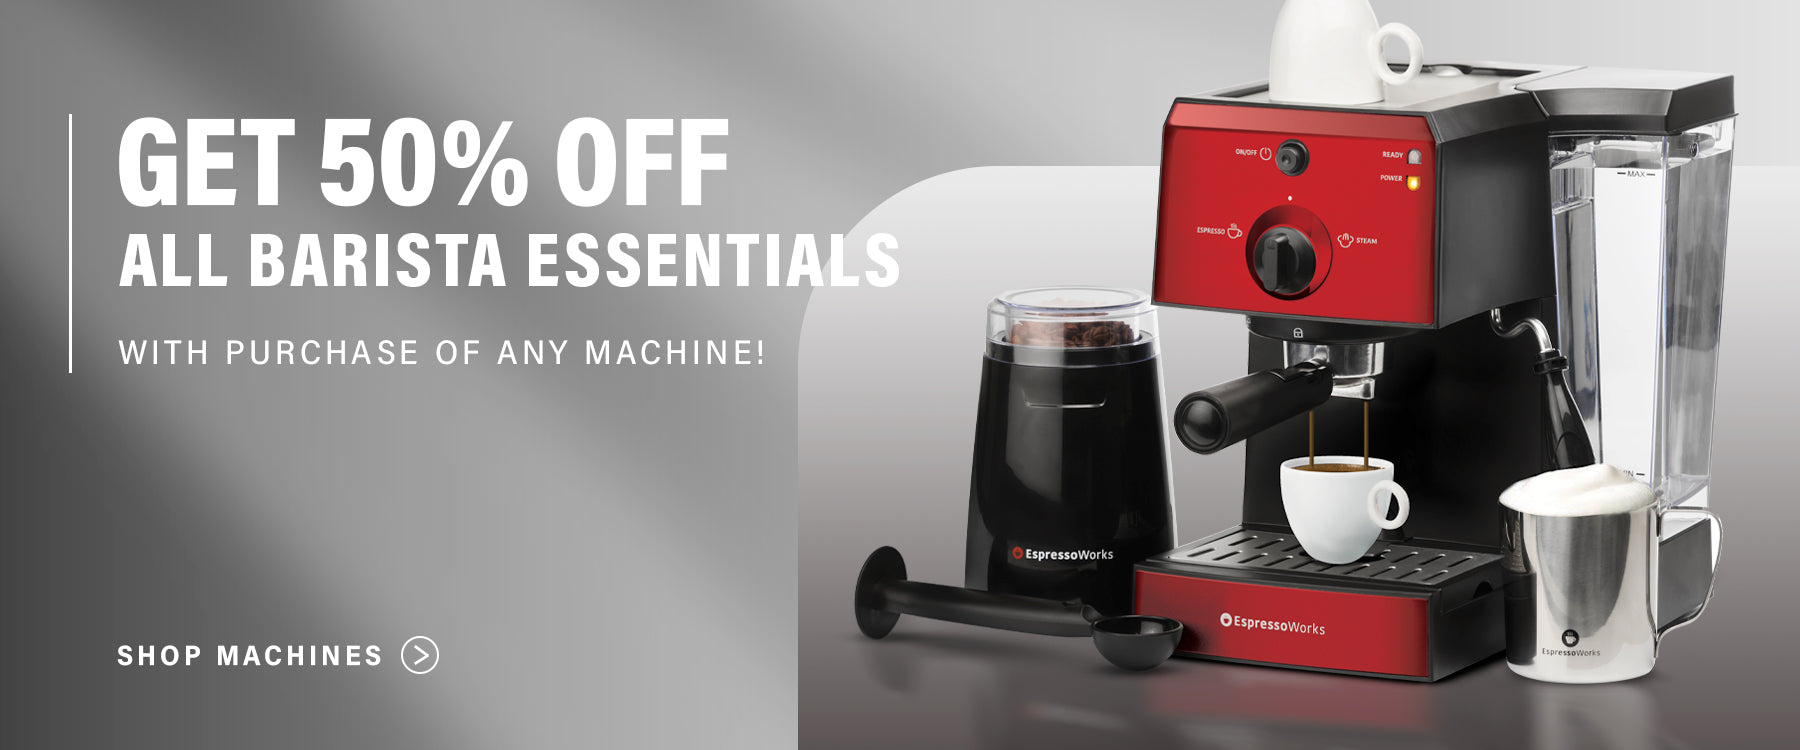 Get 50% off all barista essentials with purchase of any machine